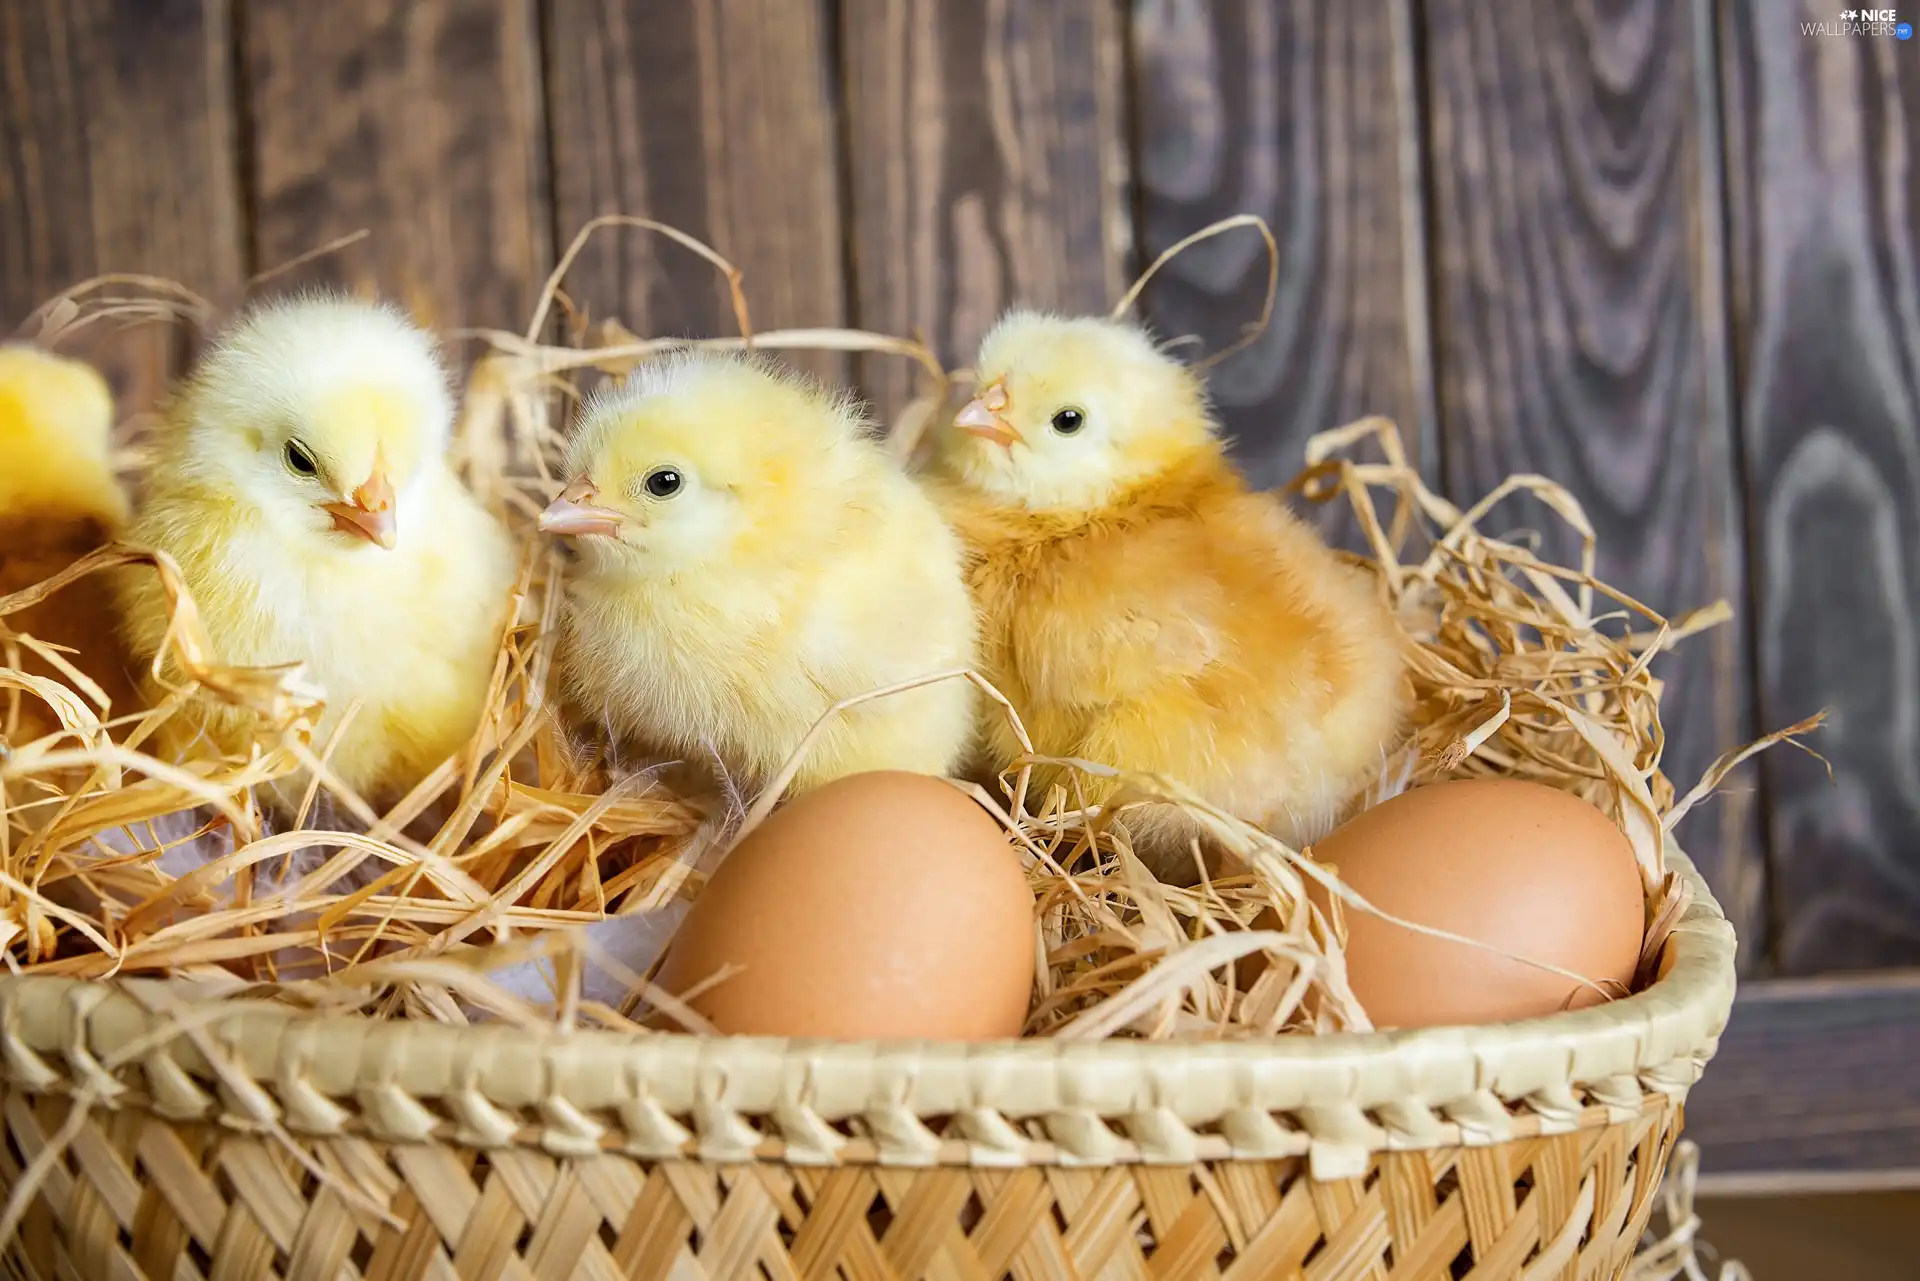 chickens, eggs, Easter, basket